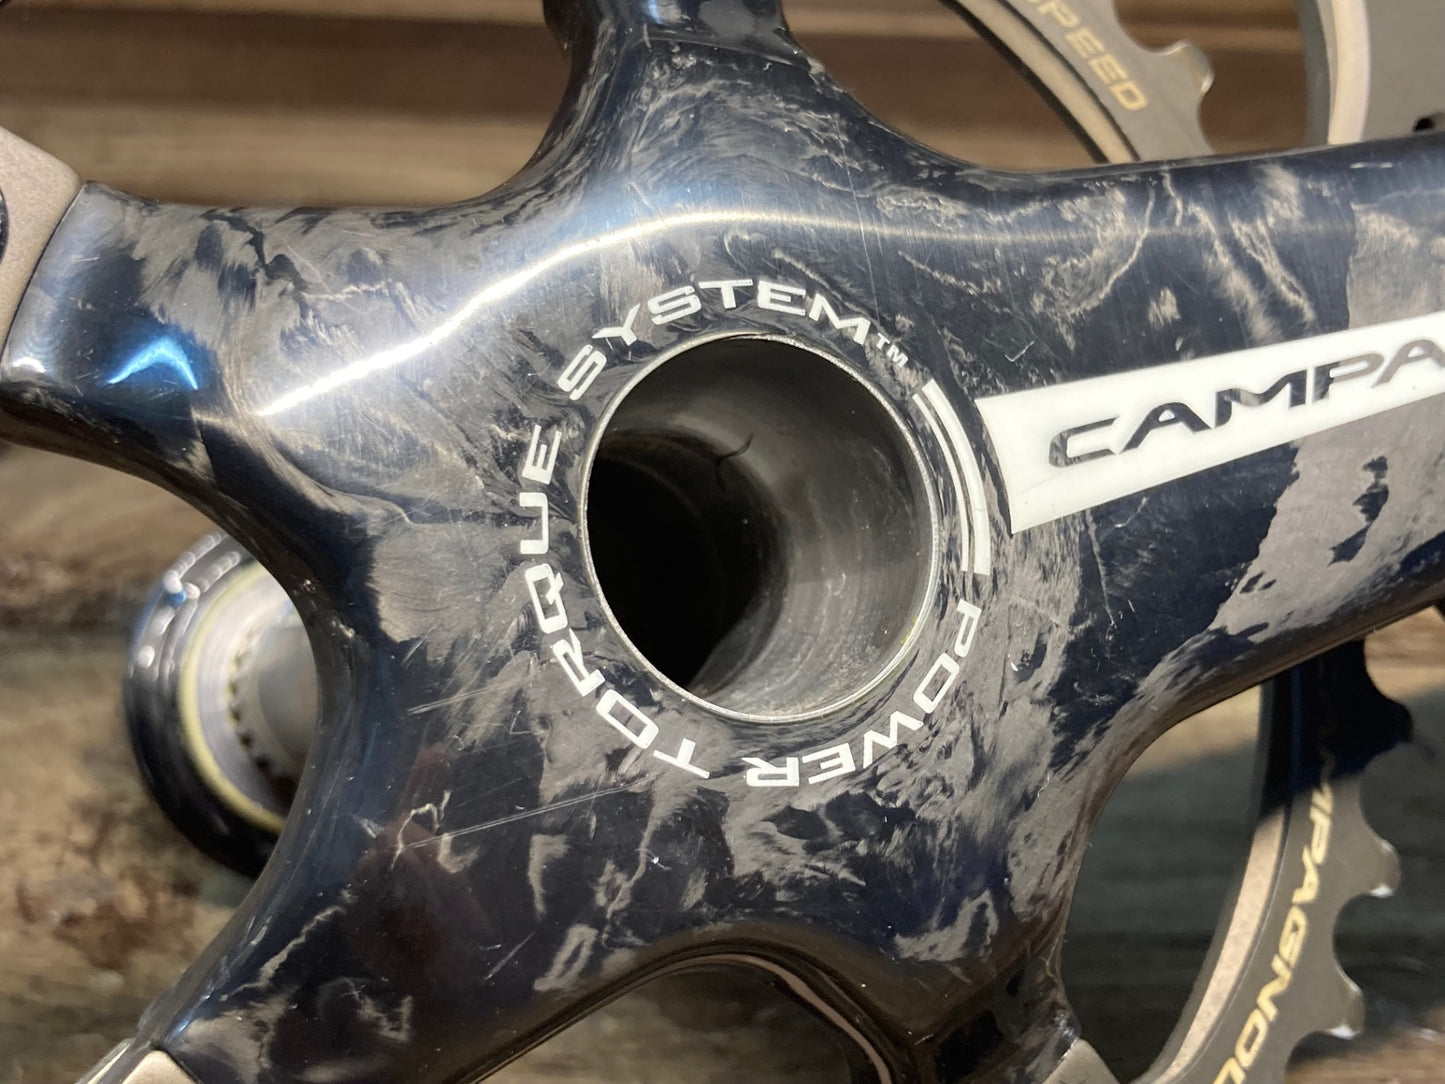 HU233 カンパニョーロ Campagnolo アテナ ATHENA クランクセット 172.5mm 52-36T 11S